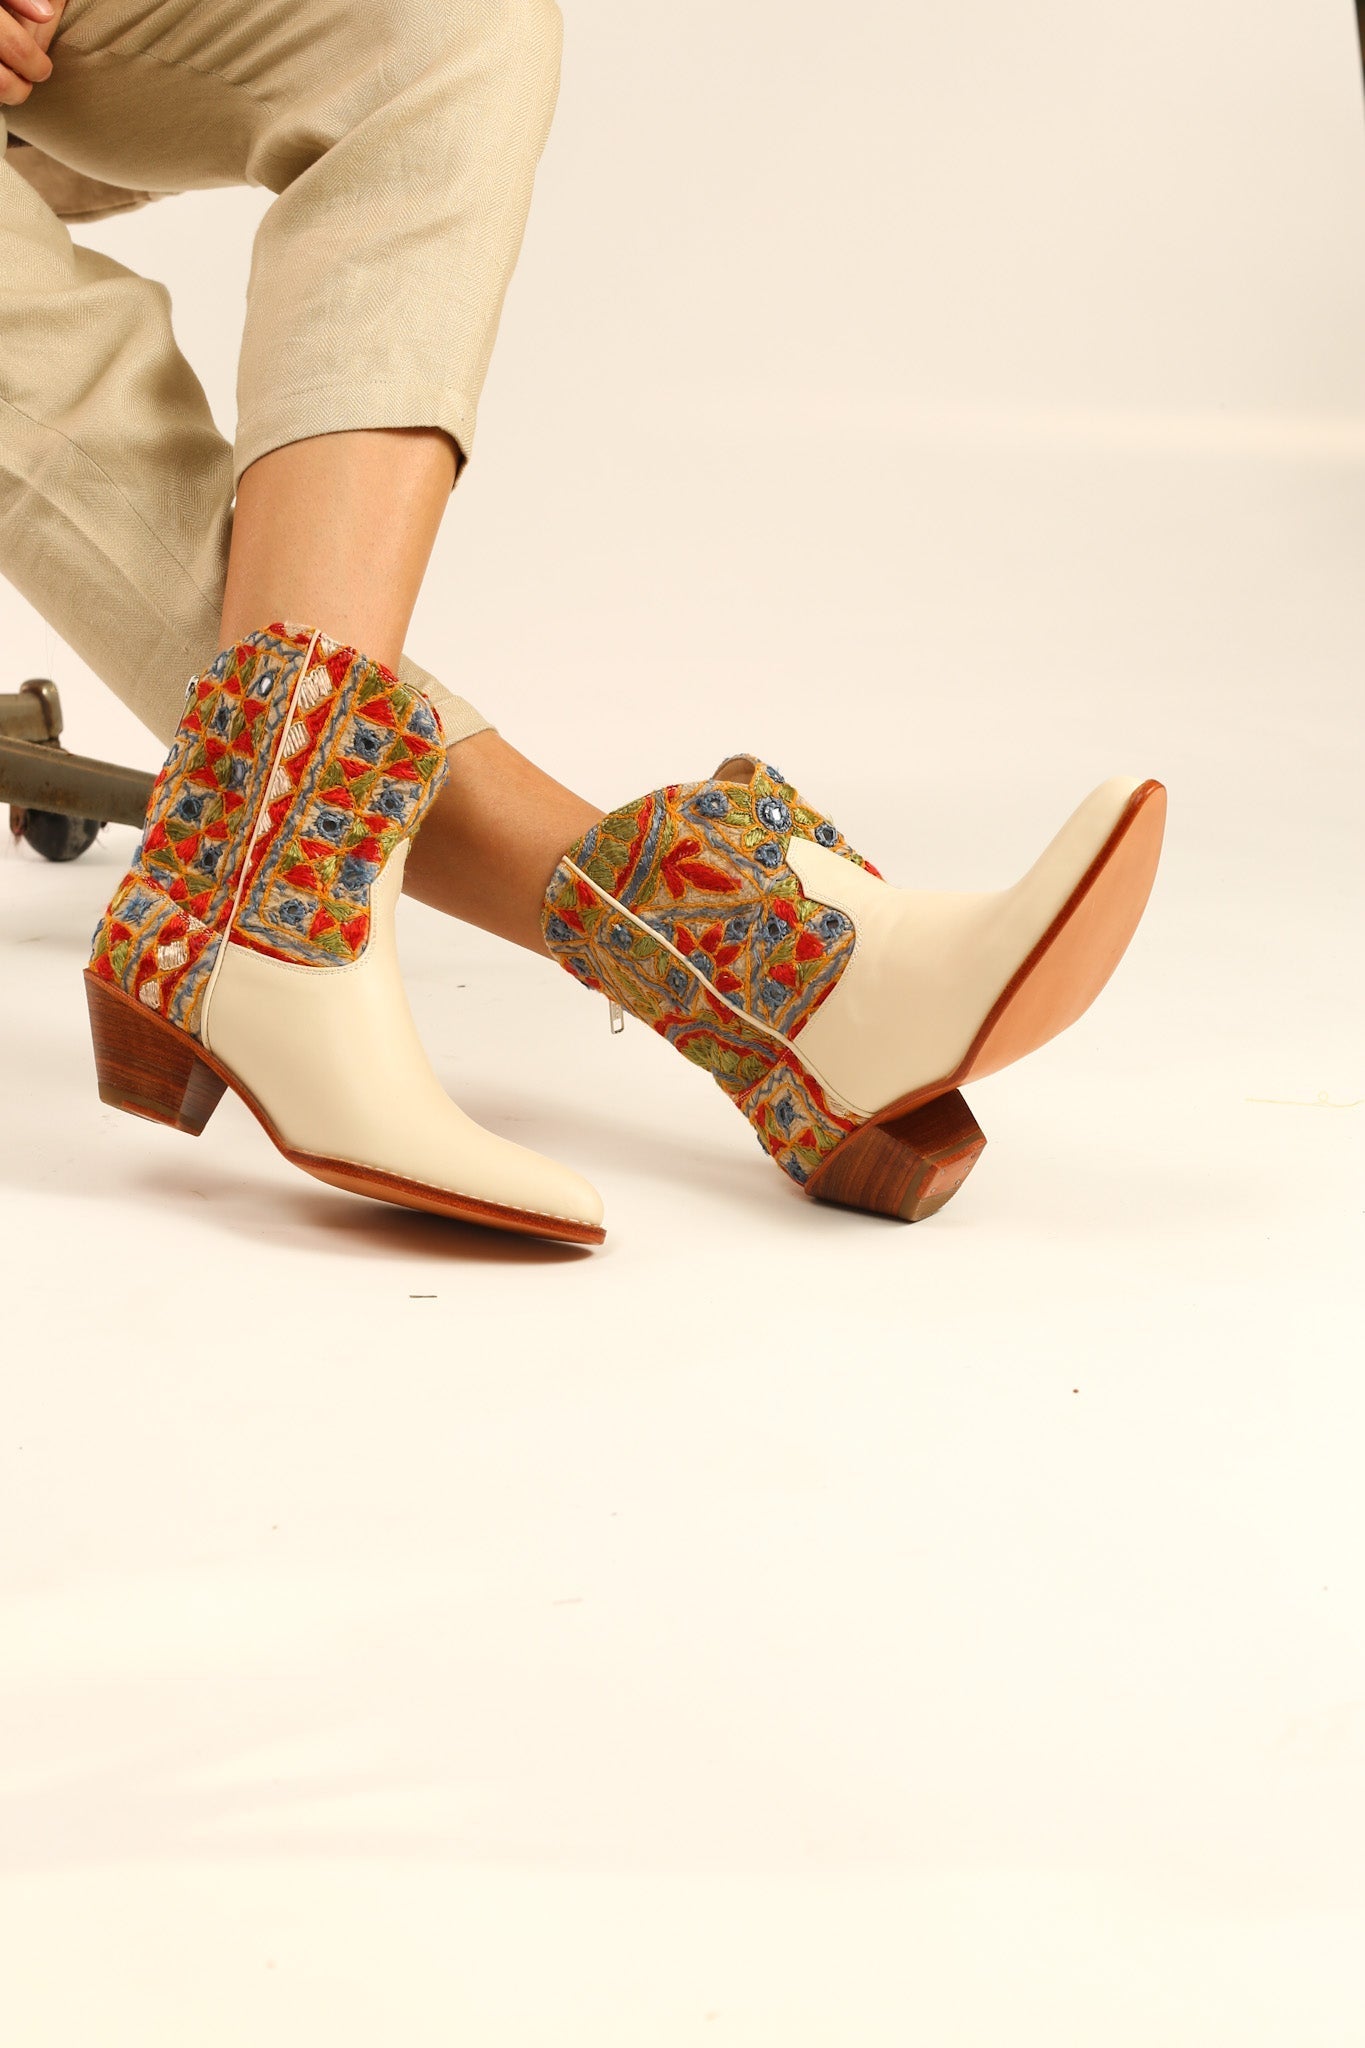 EMBROIDERED INDIAN BOOTS LEEJ - sustainably made MOMO NEW YORK sustainable clothing, boots slow fashion